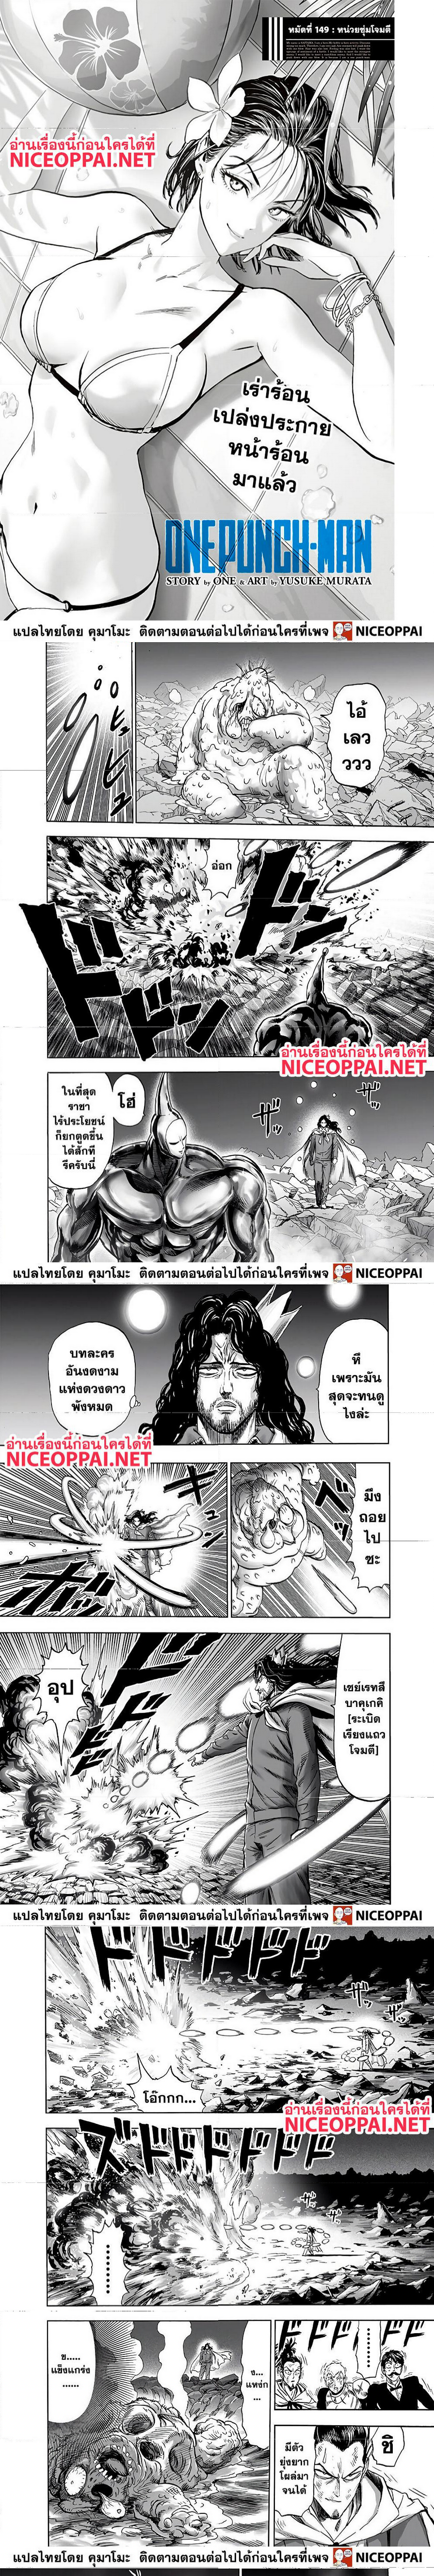 One Punch Man149 (1)